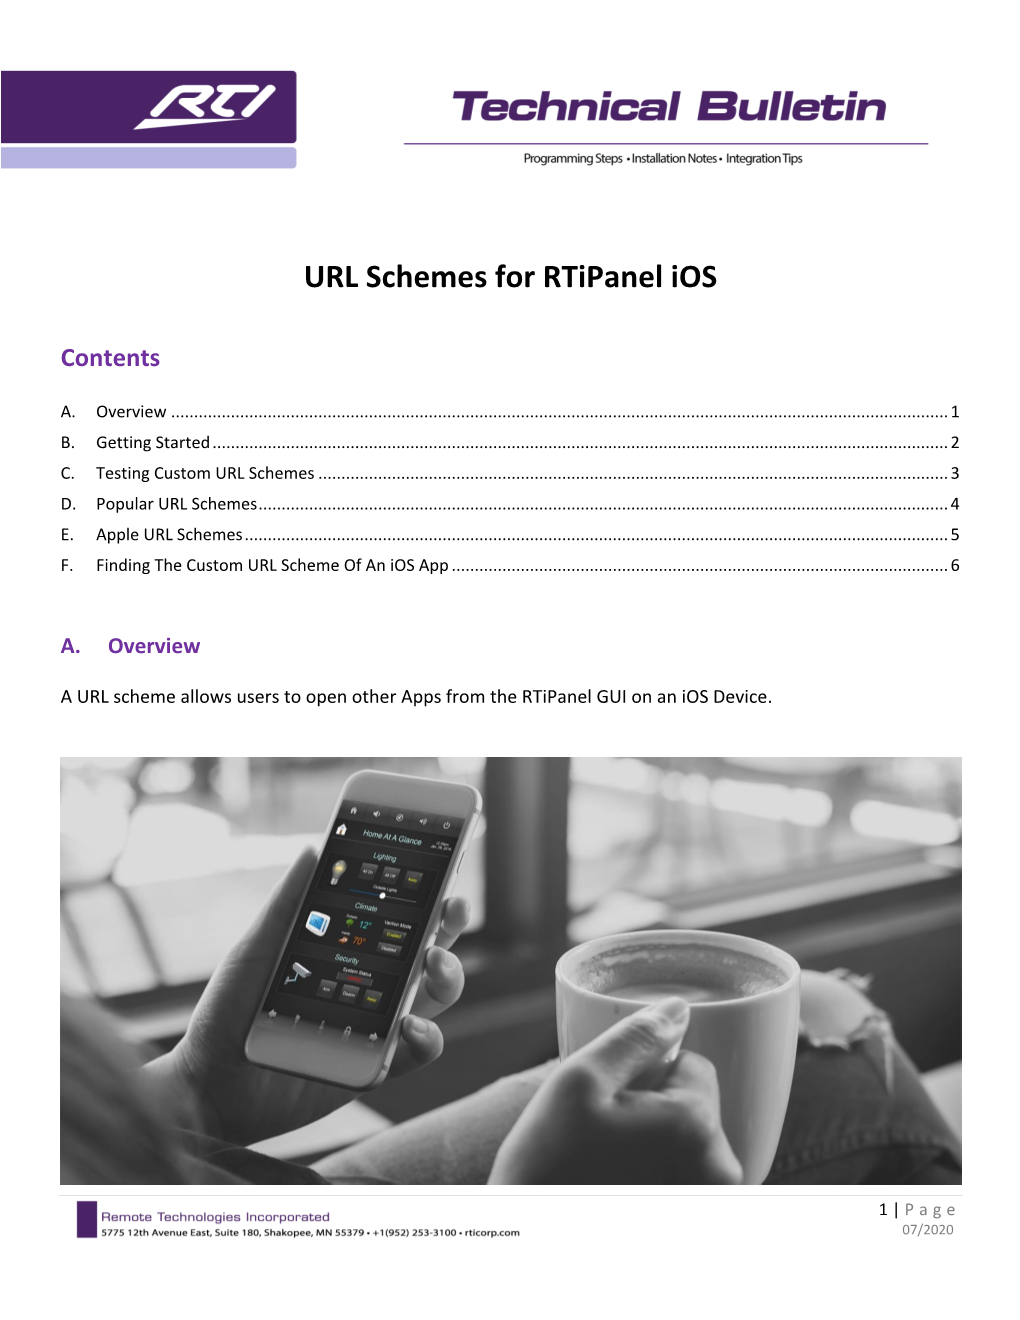 URL Schemes for Rtipanel Ios